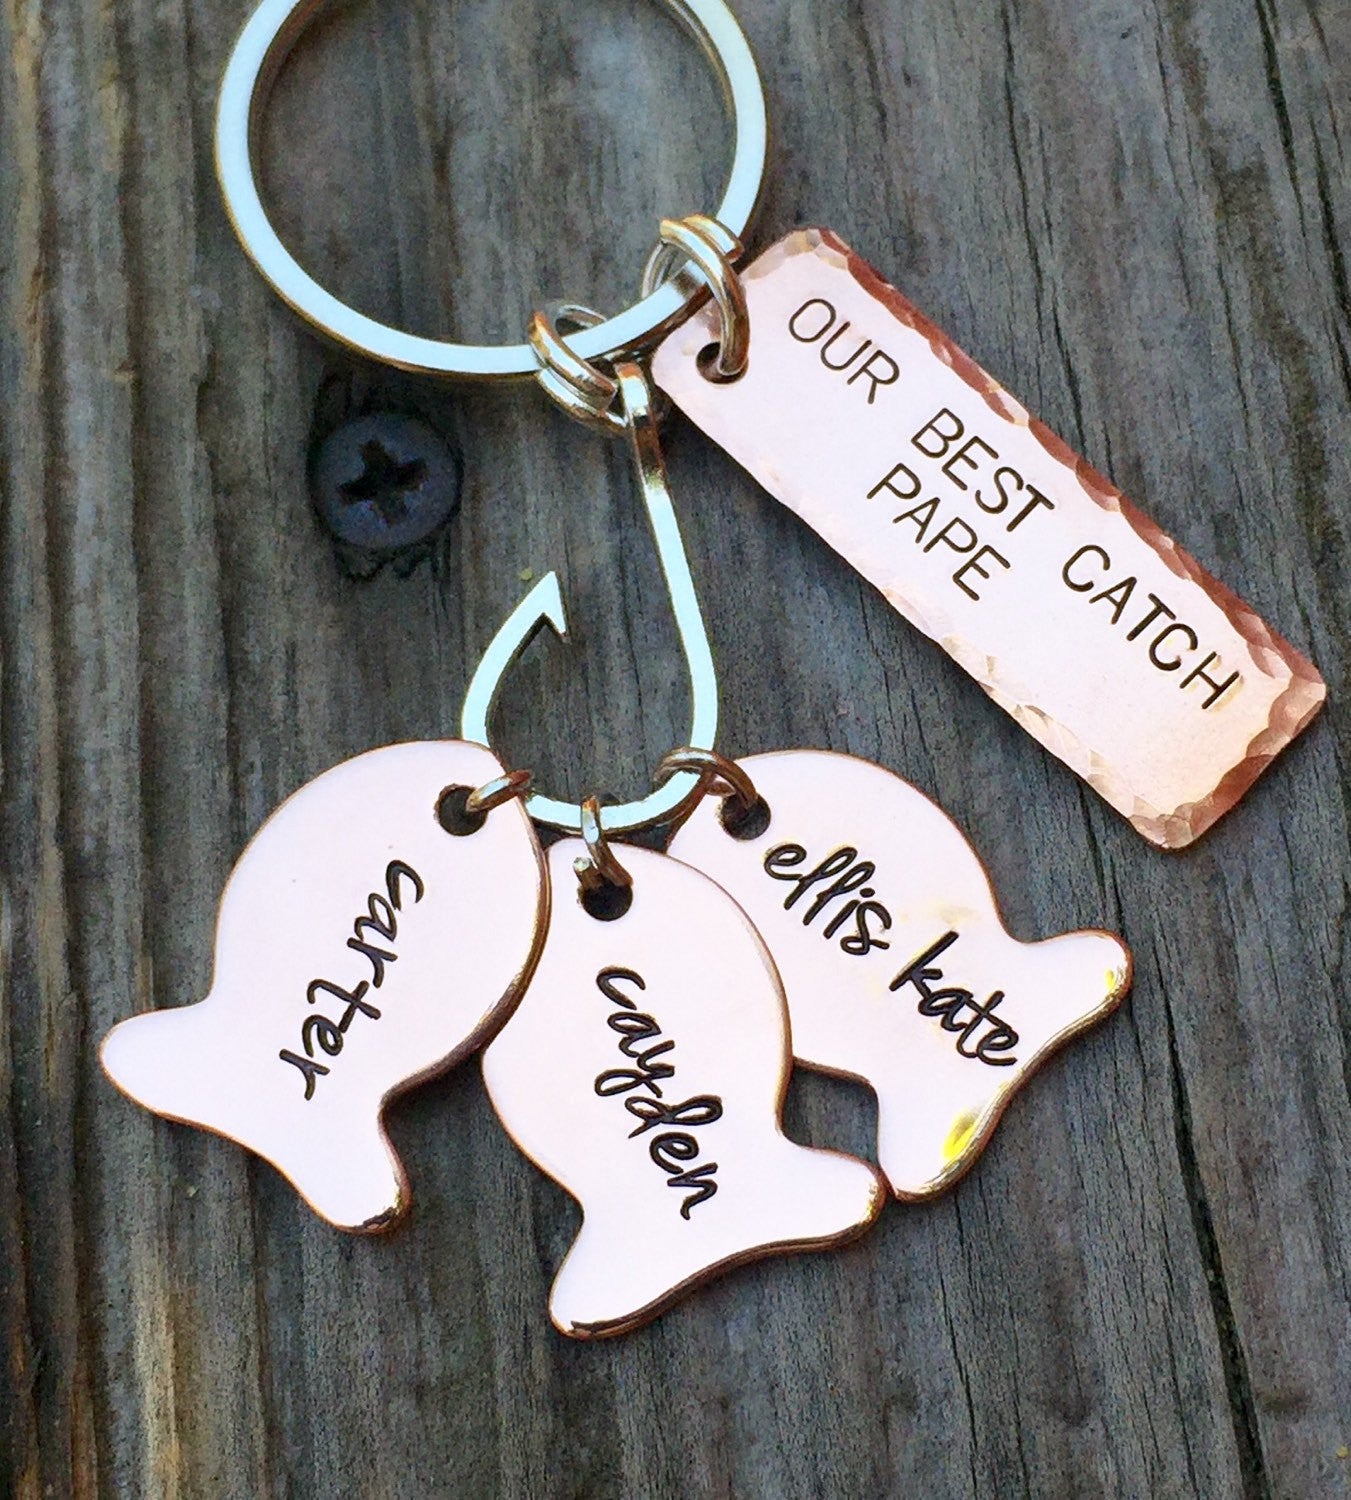 Fishing Keychain, Our Best Pape, Fishing Gifts, Personalized Fishing Keychain, Our Best Catch Dad,  natashaaloha - Natashaaloha, jewelry, bracelets, necklace, keychains, fishing lures, gifts for men, charms, personalized, 